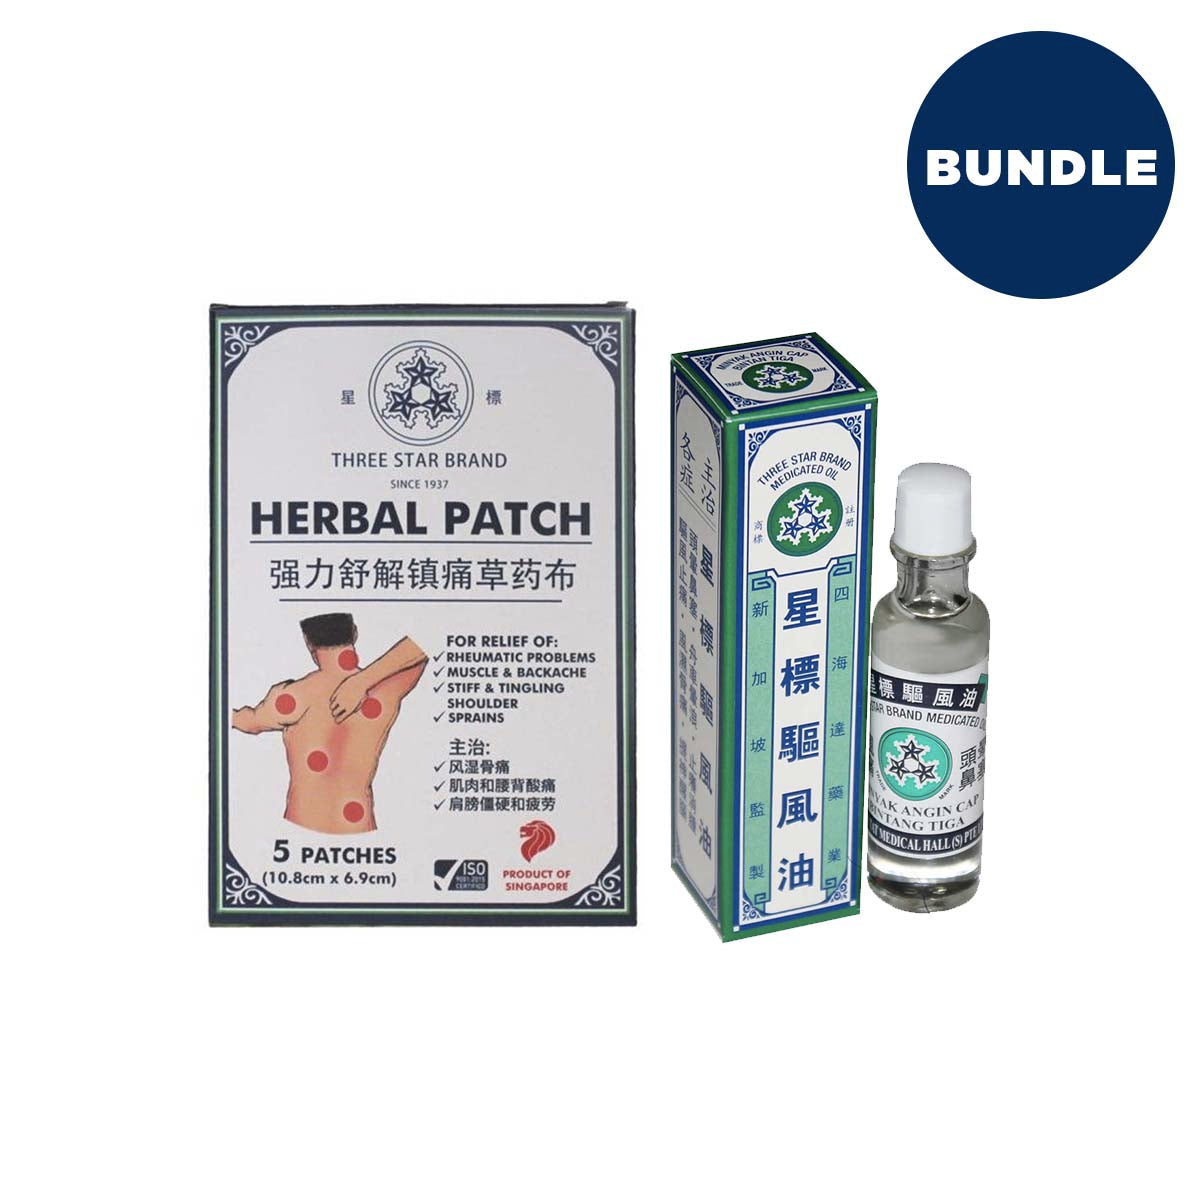 TSB Herbal Med Patch (5 patches) + Traditional Med Oil 14ml - Bundle